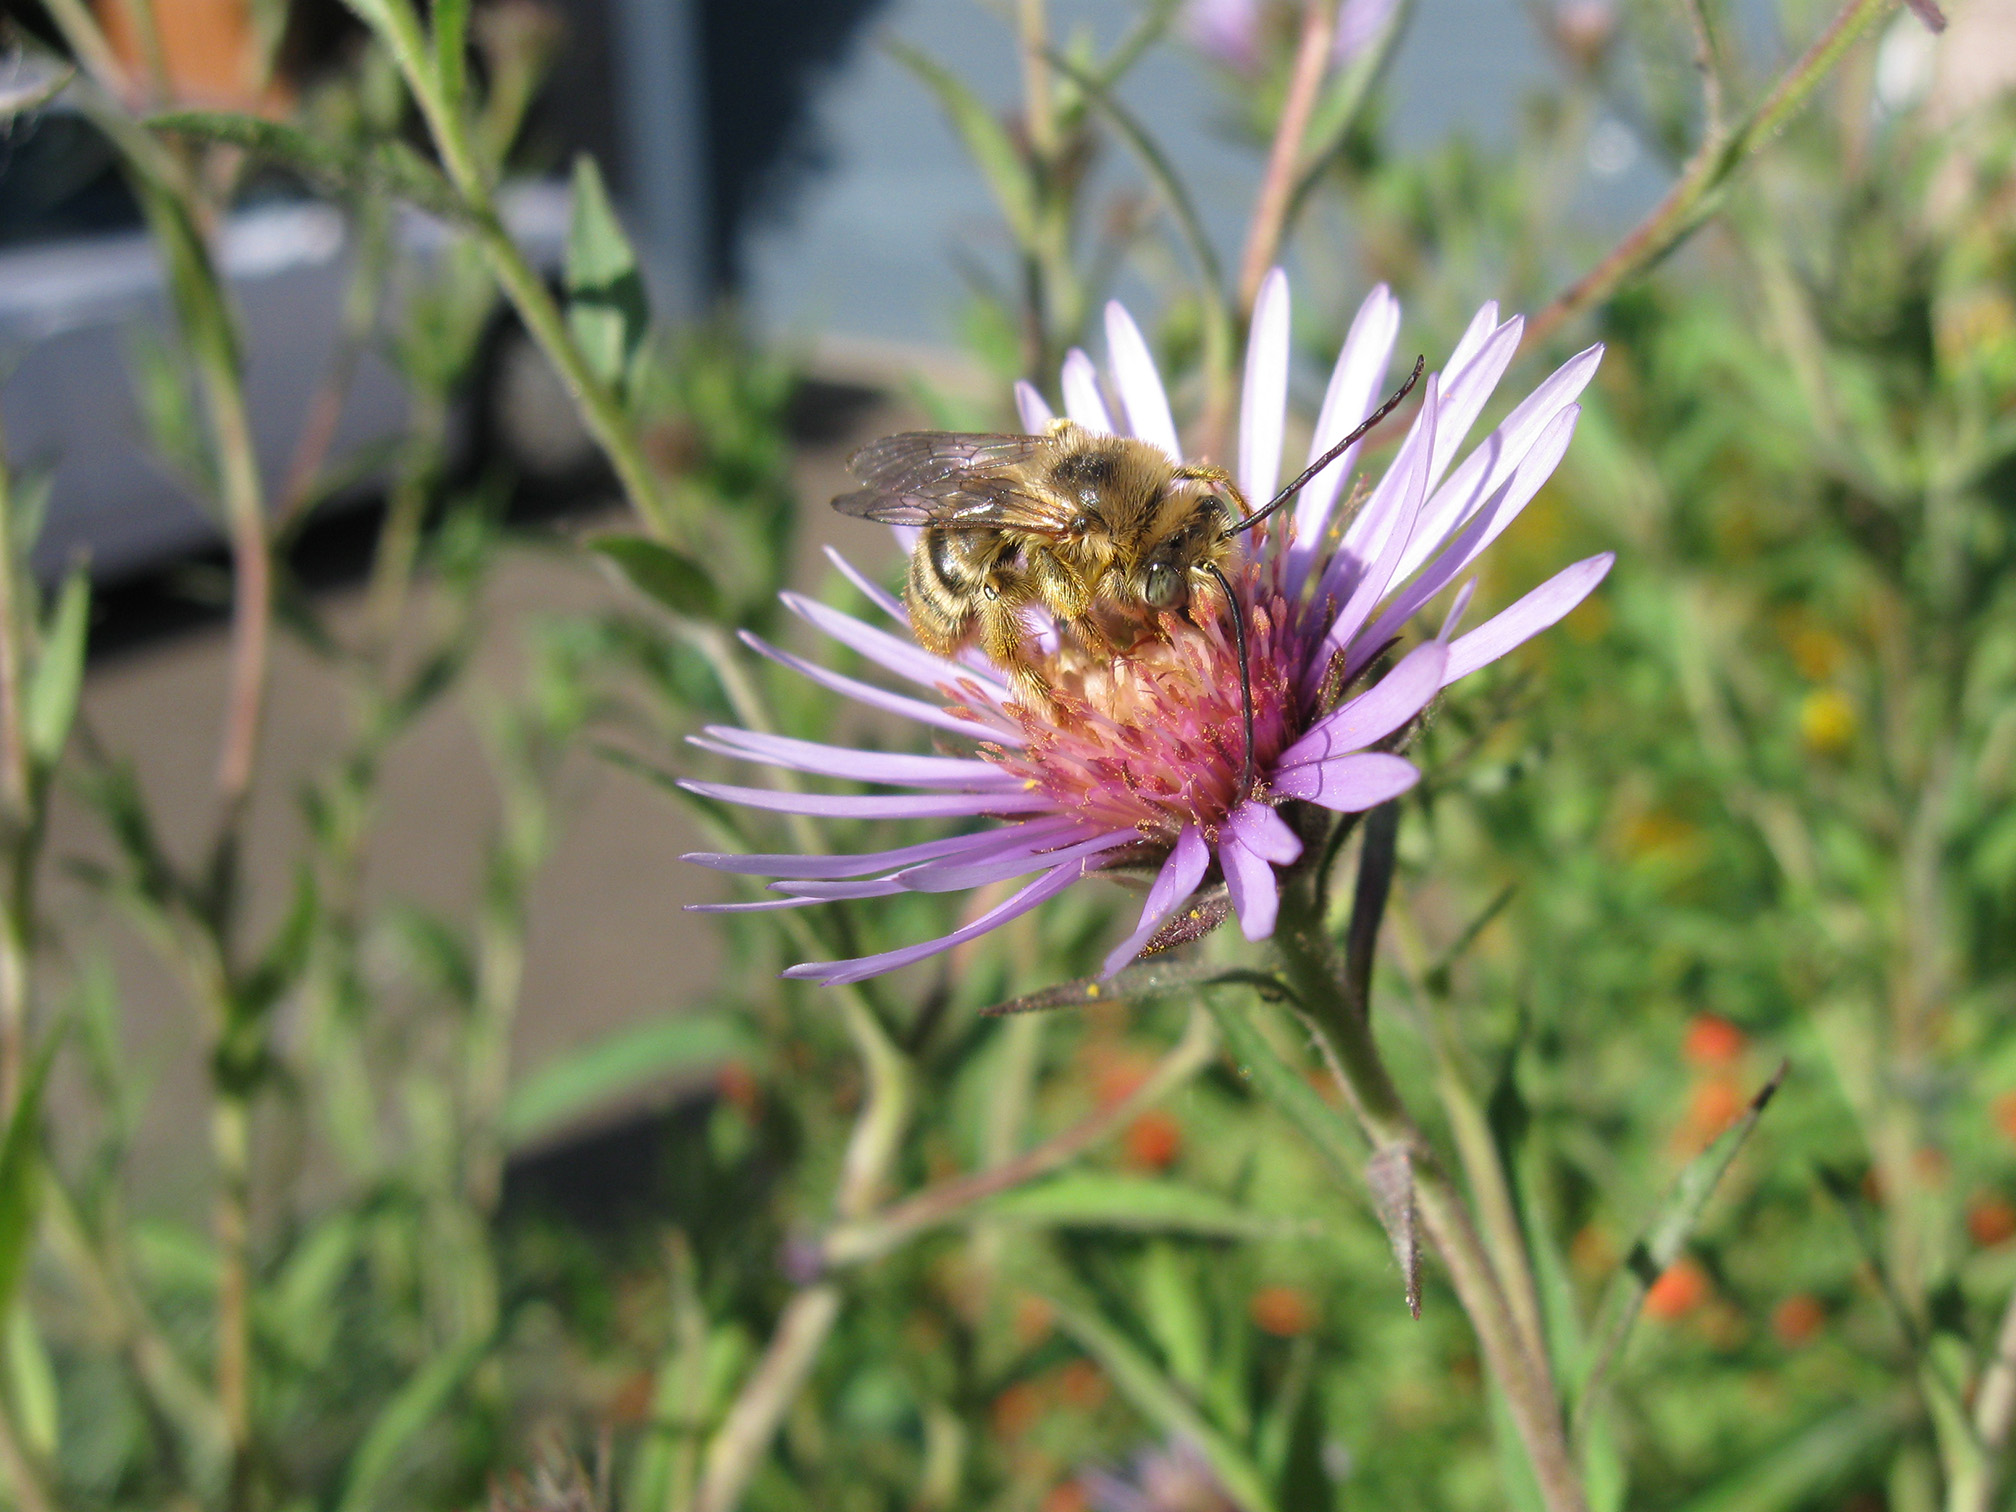 A bee foraging on a yellow and purple flower in a suburban garden. The bee is golden-brown and hairy, and has very long antennae. The flower has many narrow, purple petals that radiate out from the yellow center. The flower is growing in a flower border beside a house. Behind can be seen a blue garage door and a white sedan parked on the driveway.